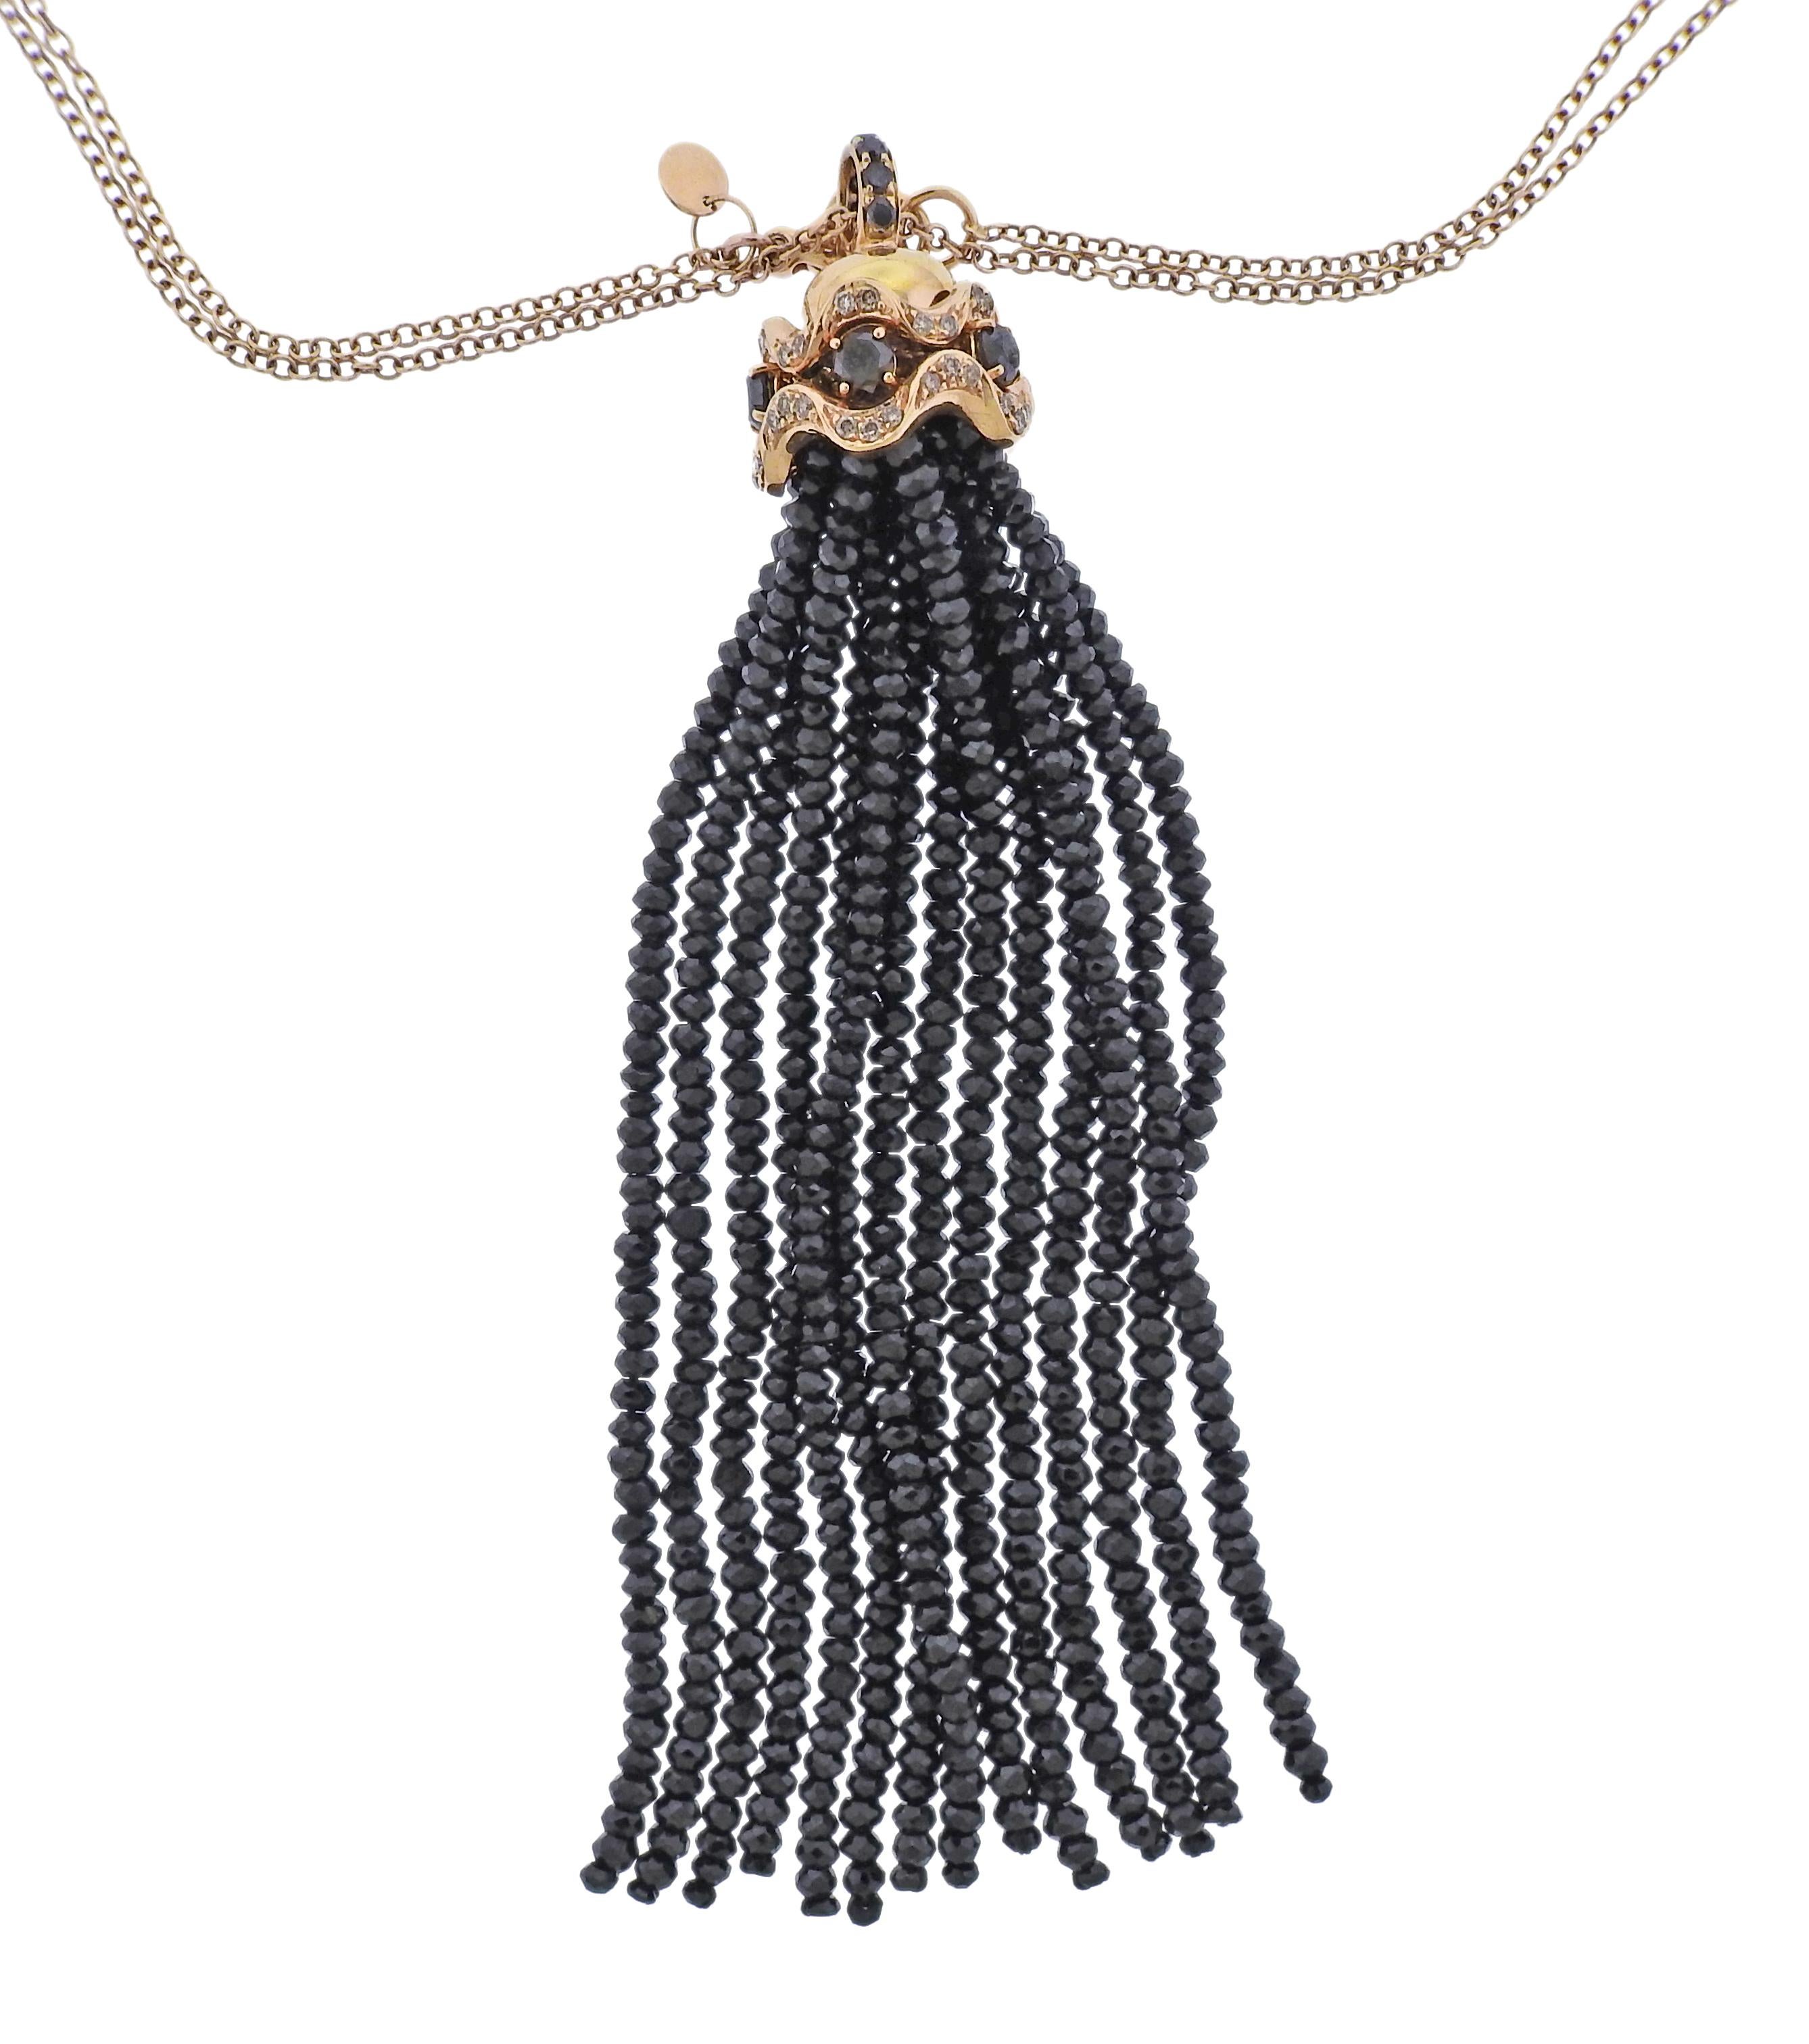 Brand new with tag Bucherer 18k gold long necklace with tassel pendant, set with 0.65ctw SI/Fancy diamonds, 145ctw spinel and 5ctw onyx. Retail $6830. Comes with box.  Necklace is 36